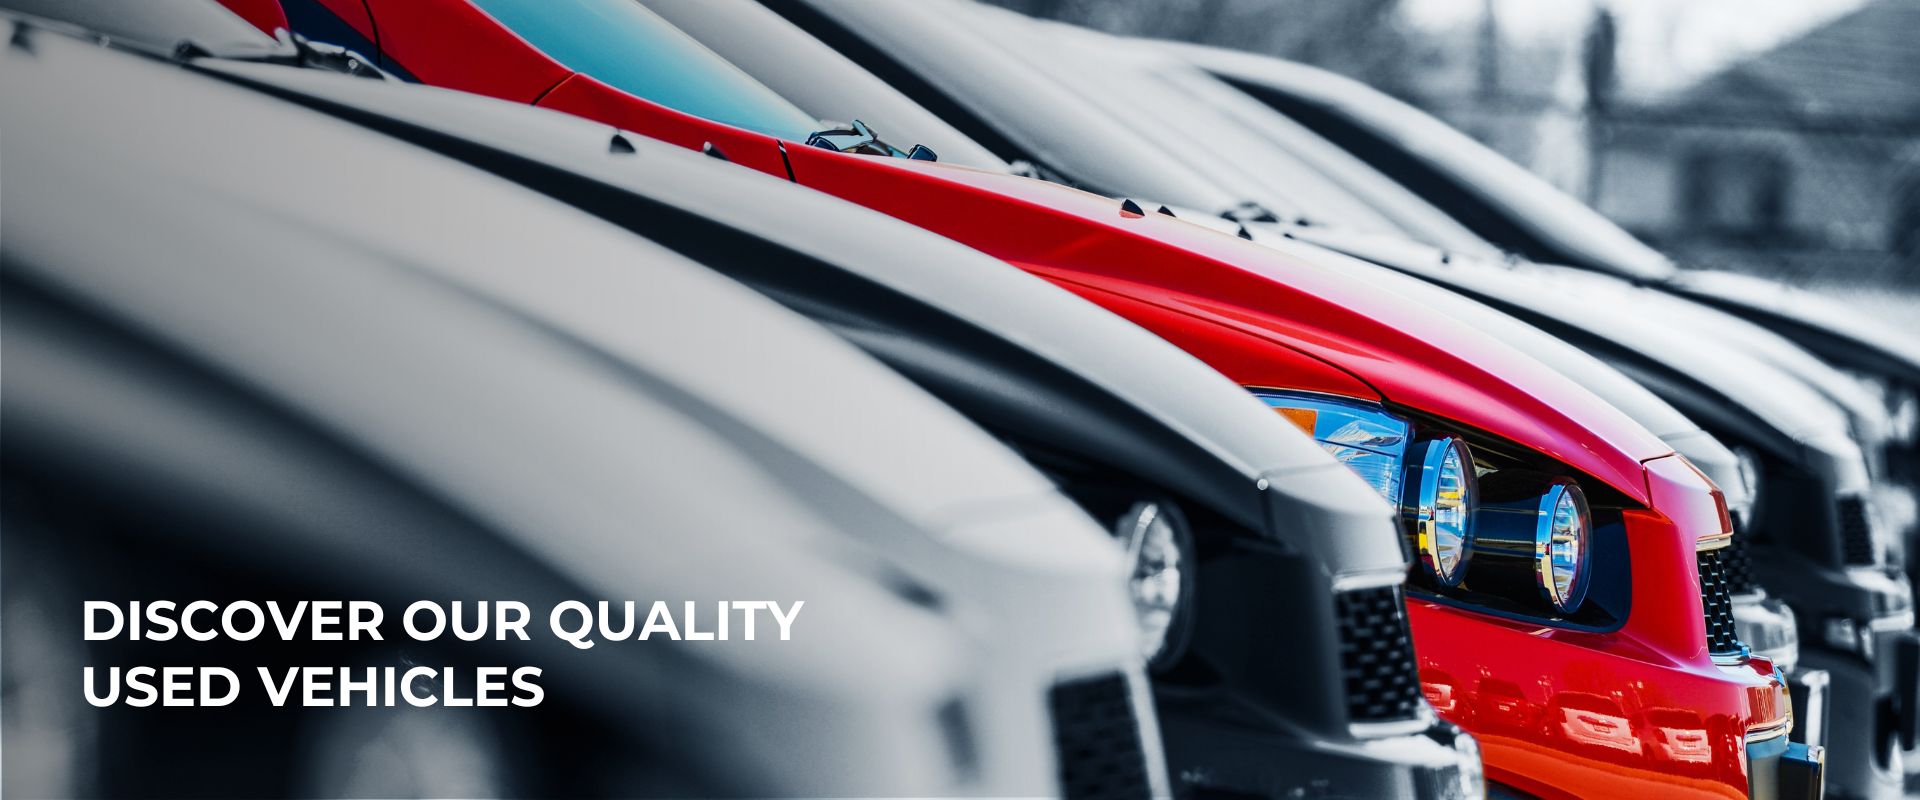 Discover our quality used vehicles